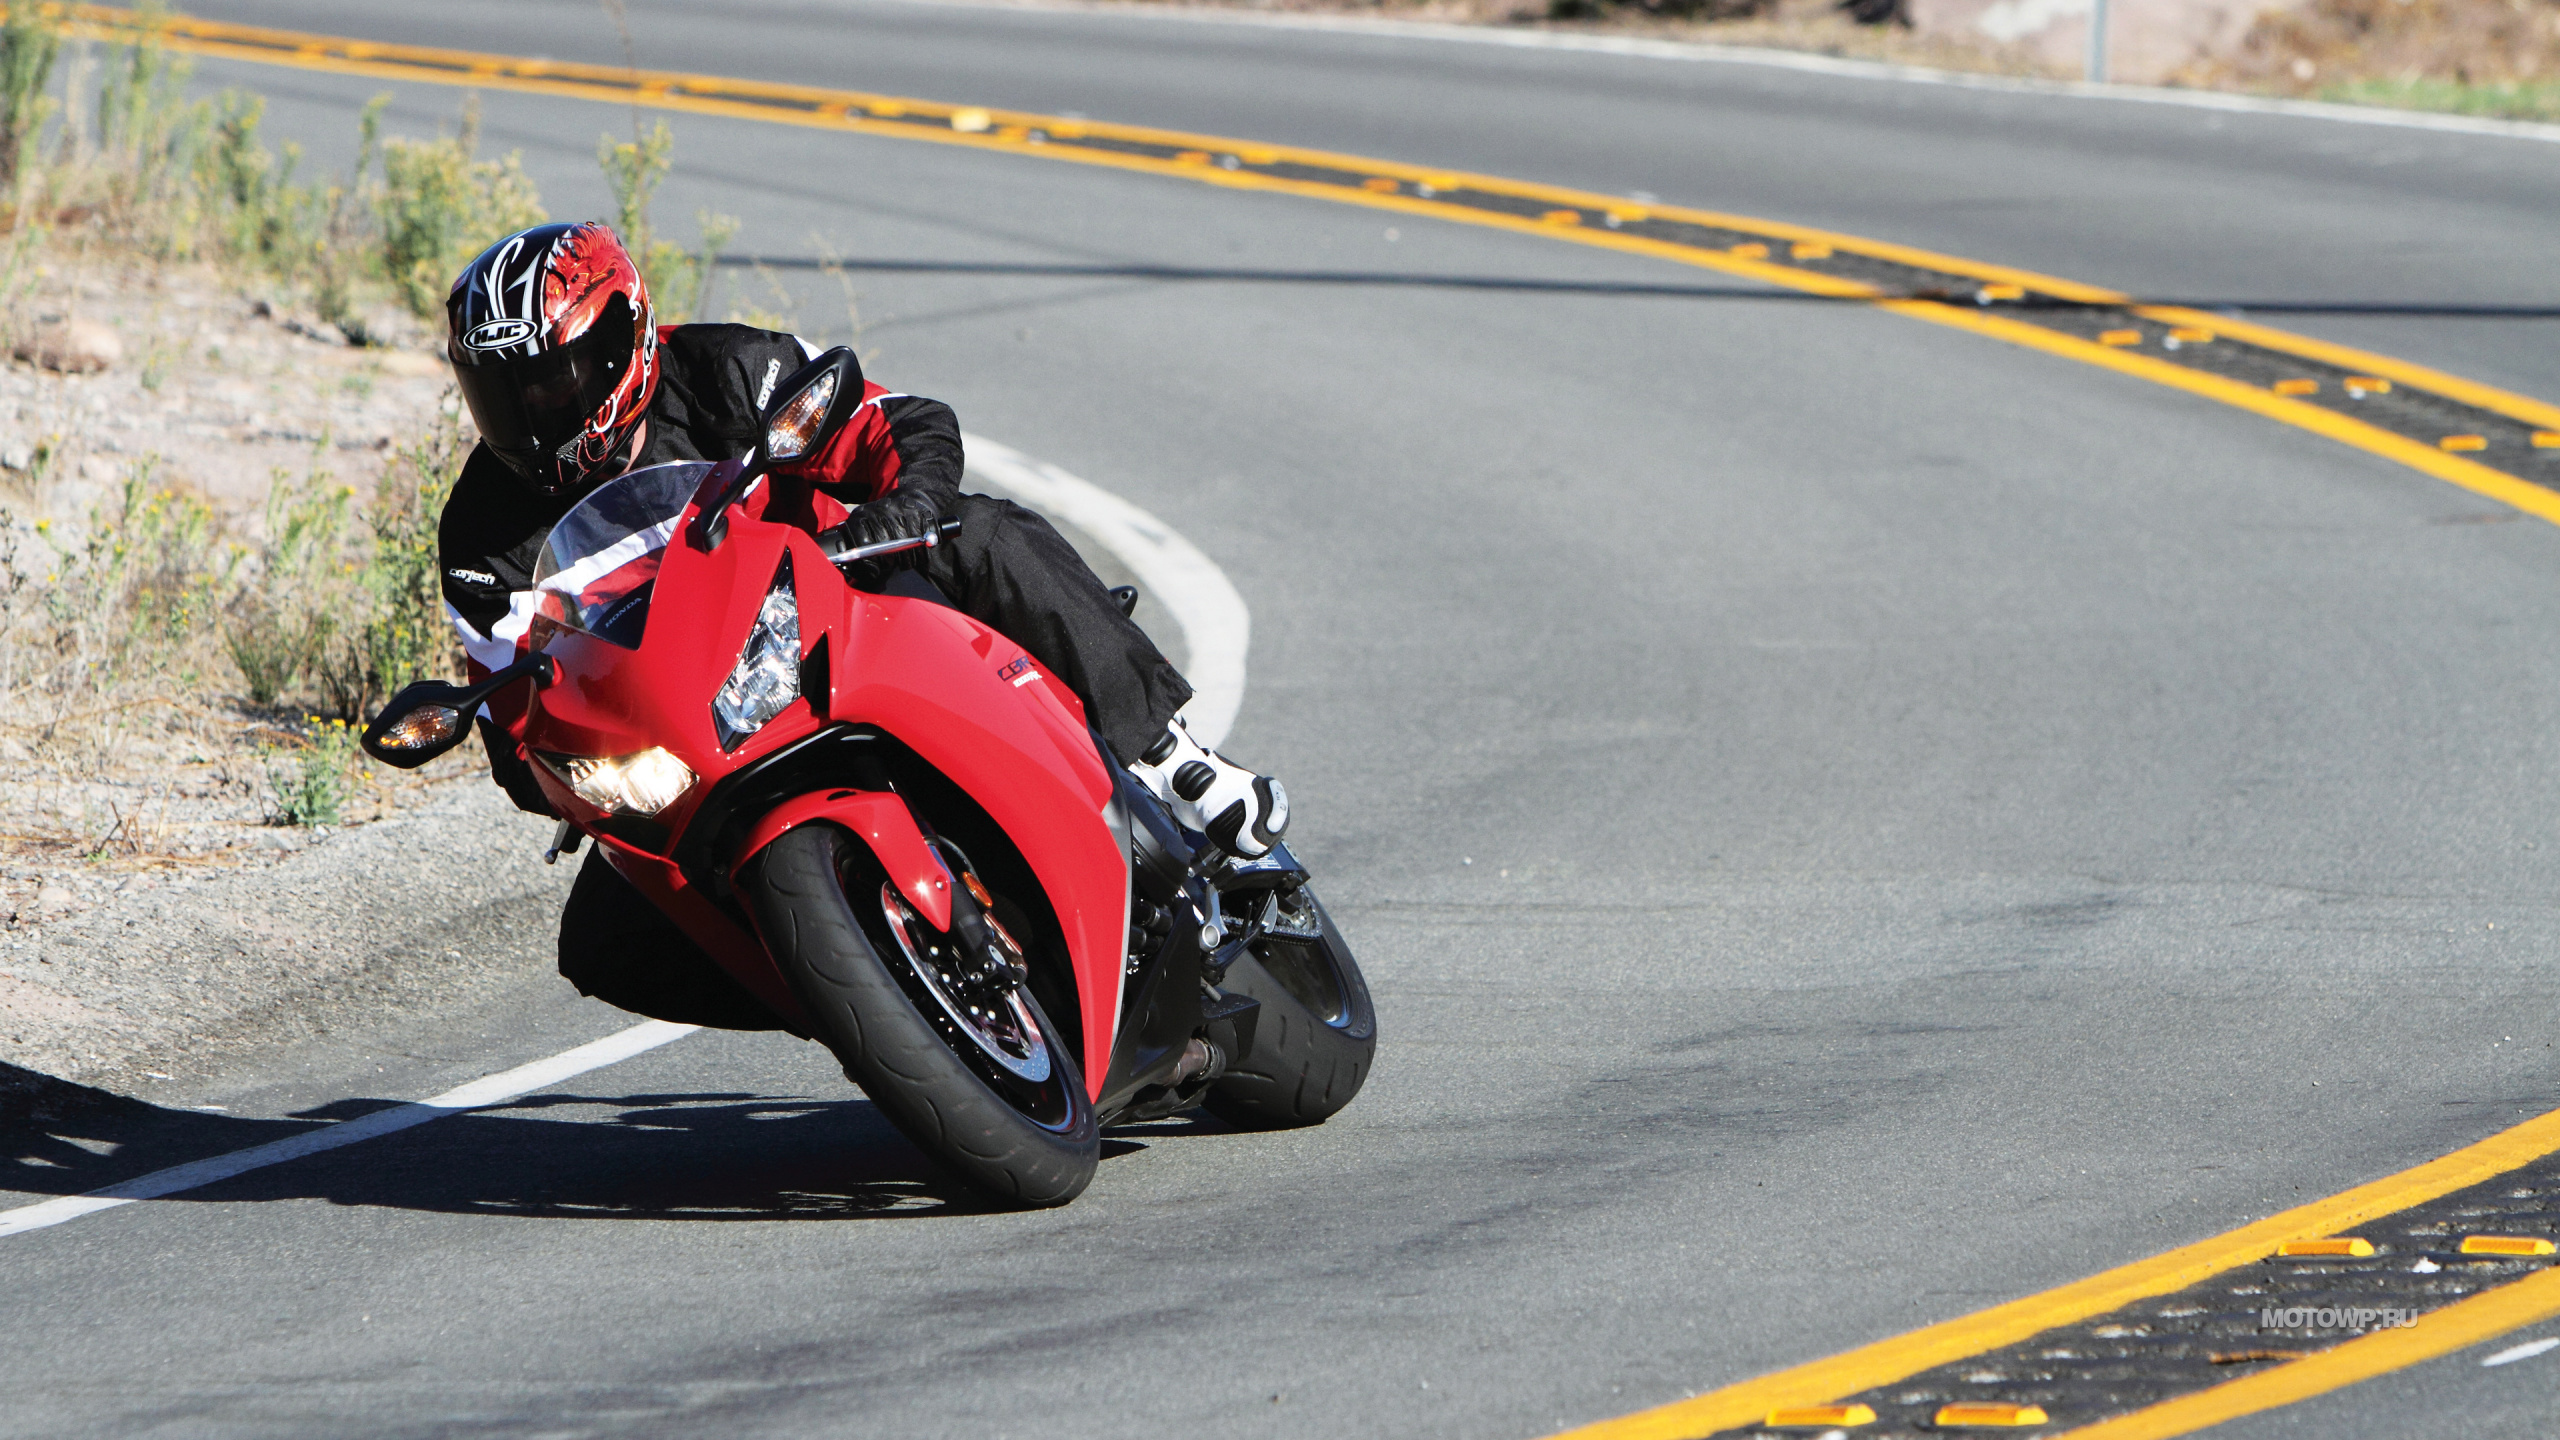 Man in Red and Black Sports Shirt Riding Red Sports Bike on Road During Daytime. Wallpaper in 2560x1440 Resolution